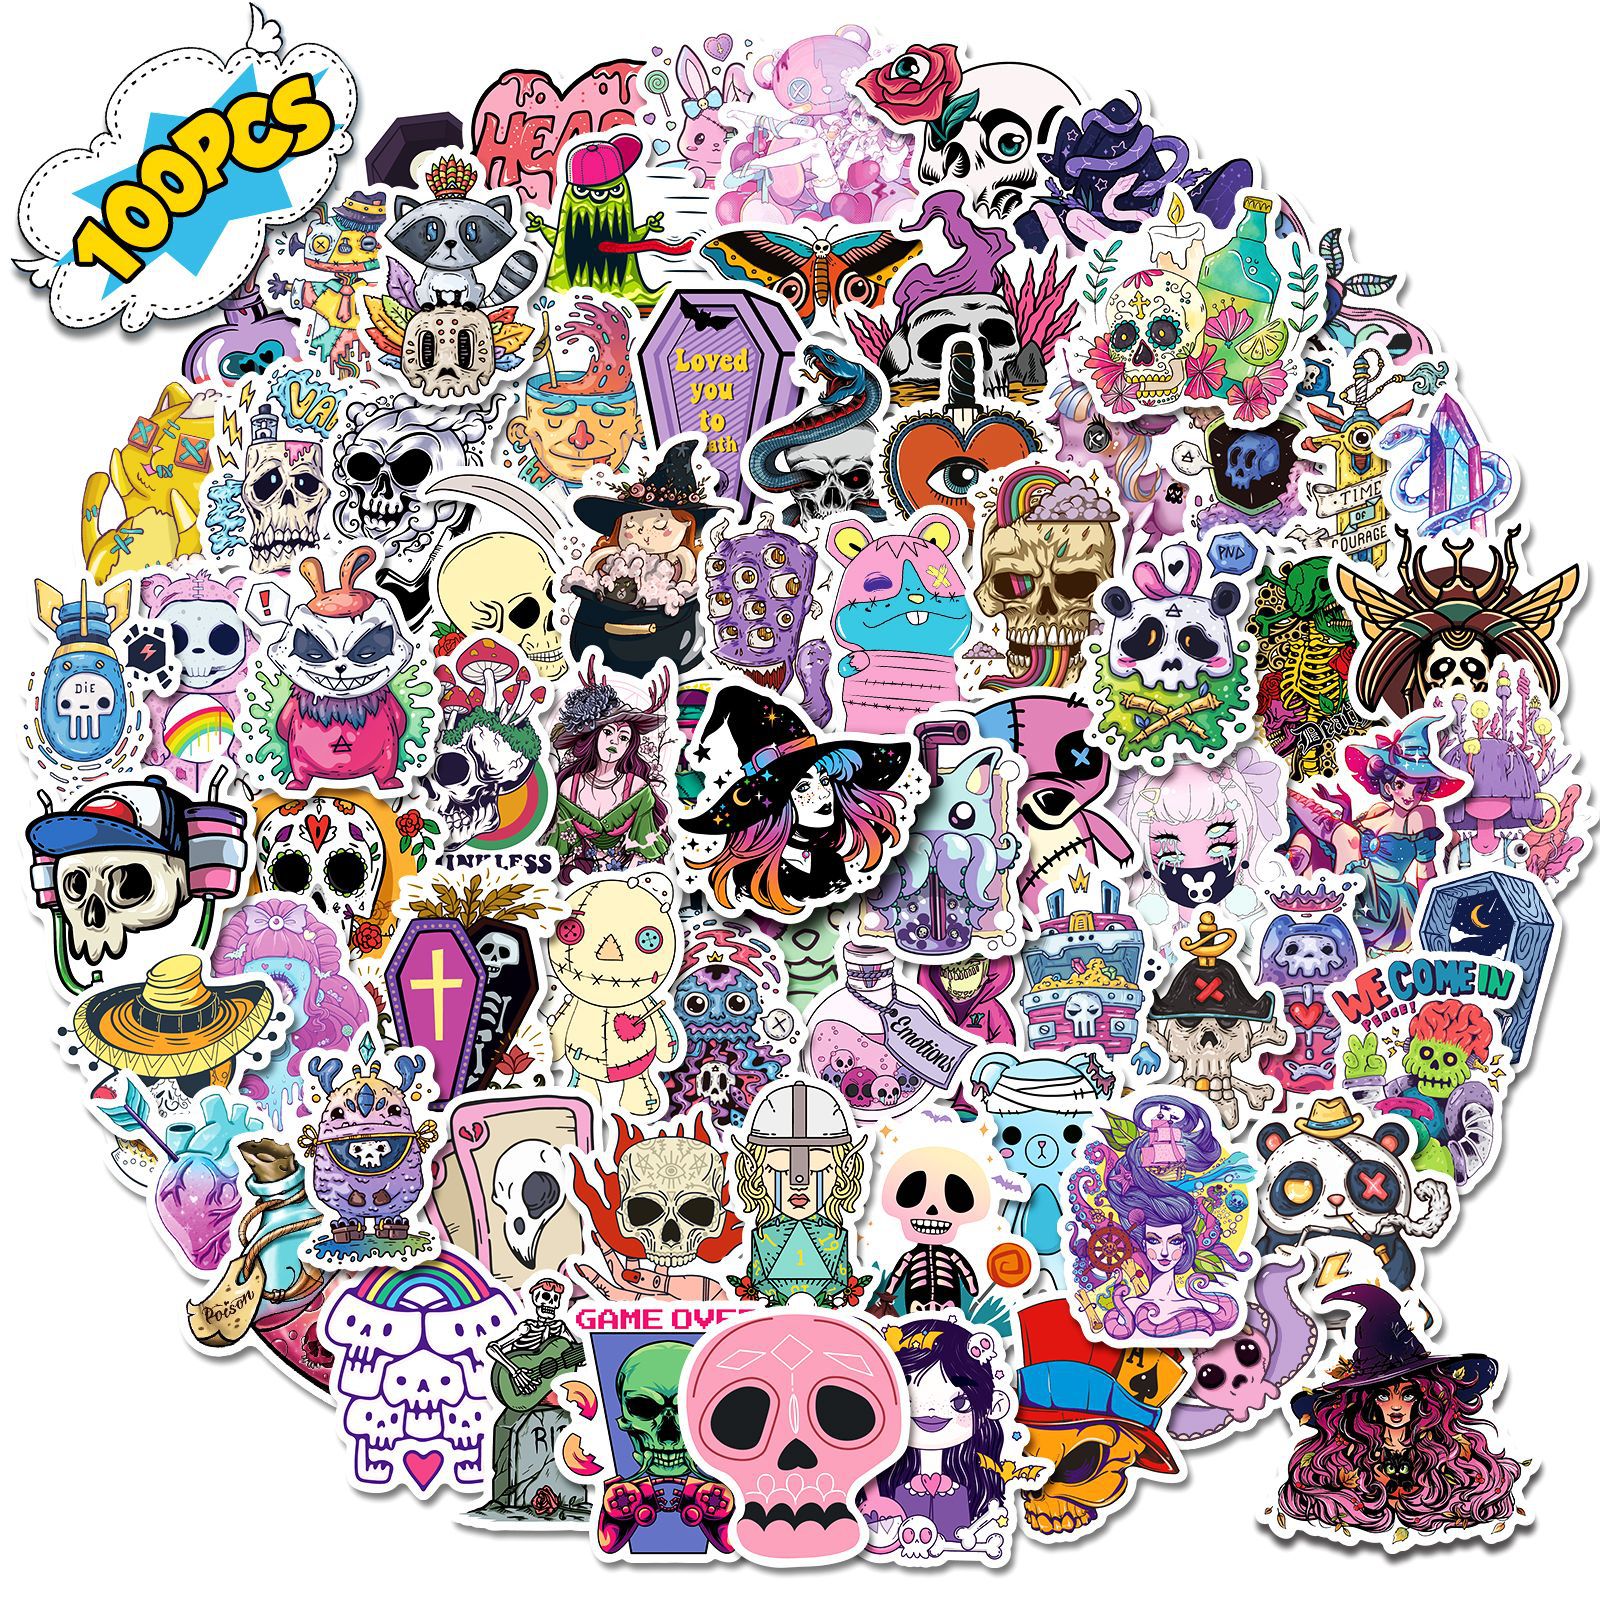 100PCS Gothic Style Skull Graffiti Stickers Purple White Black Horrible Witch Ghost Cartoon Punk personality DIY Stickers Waterproof Removable